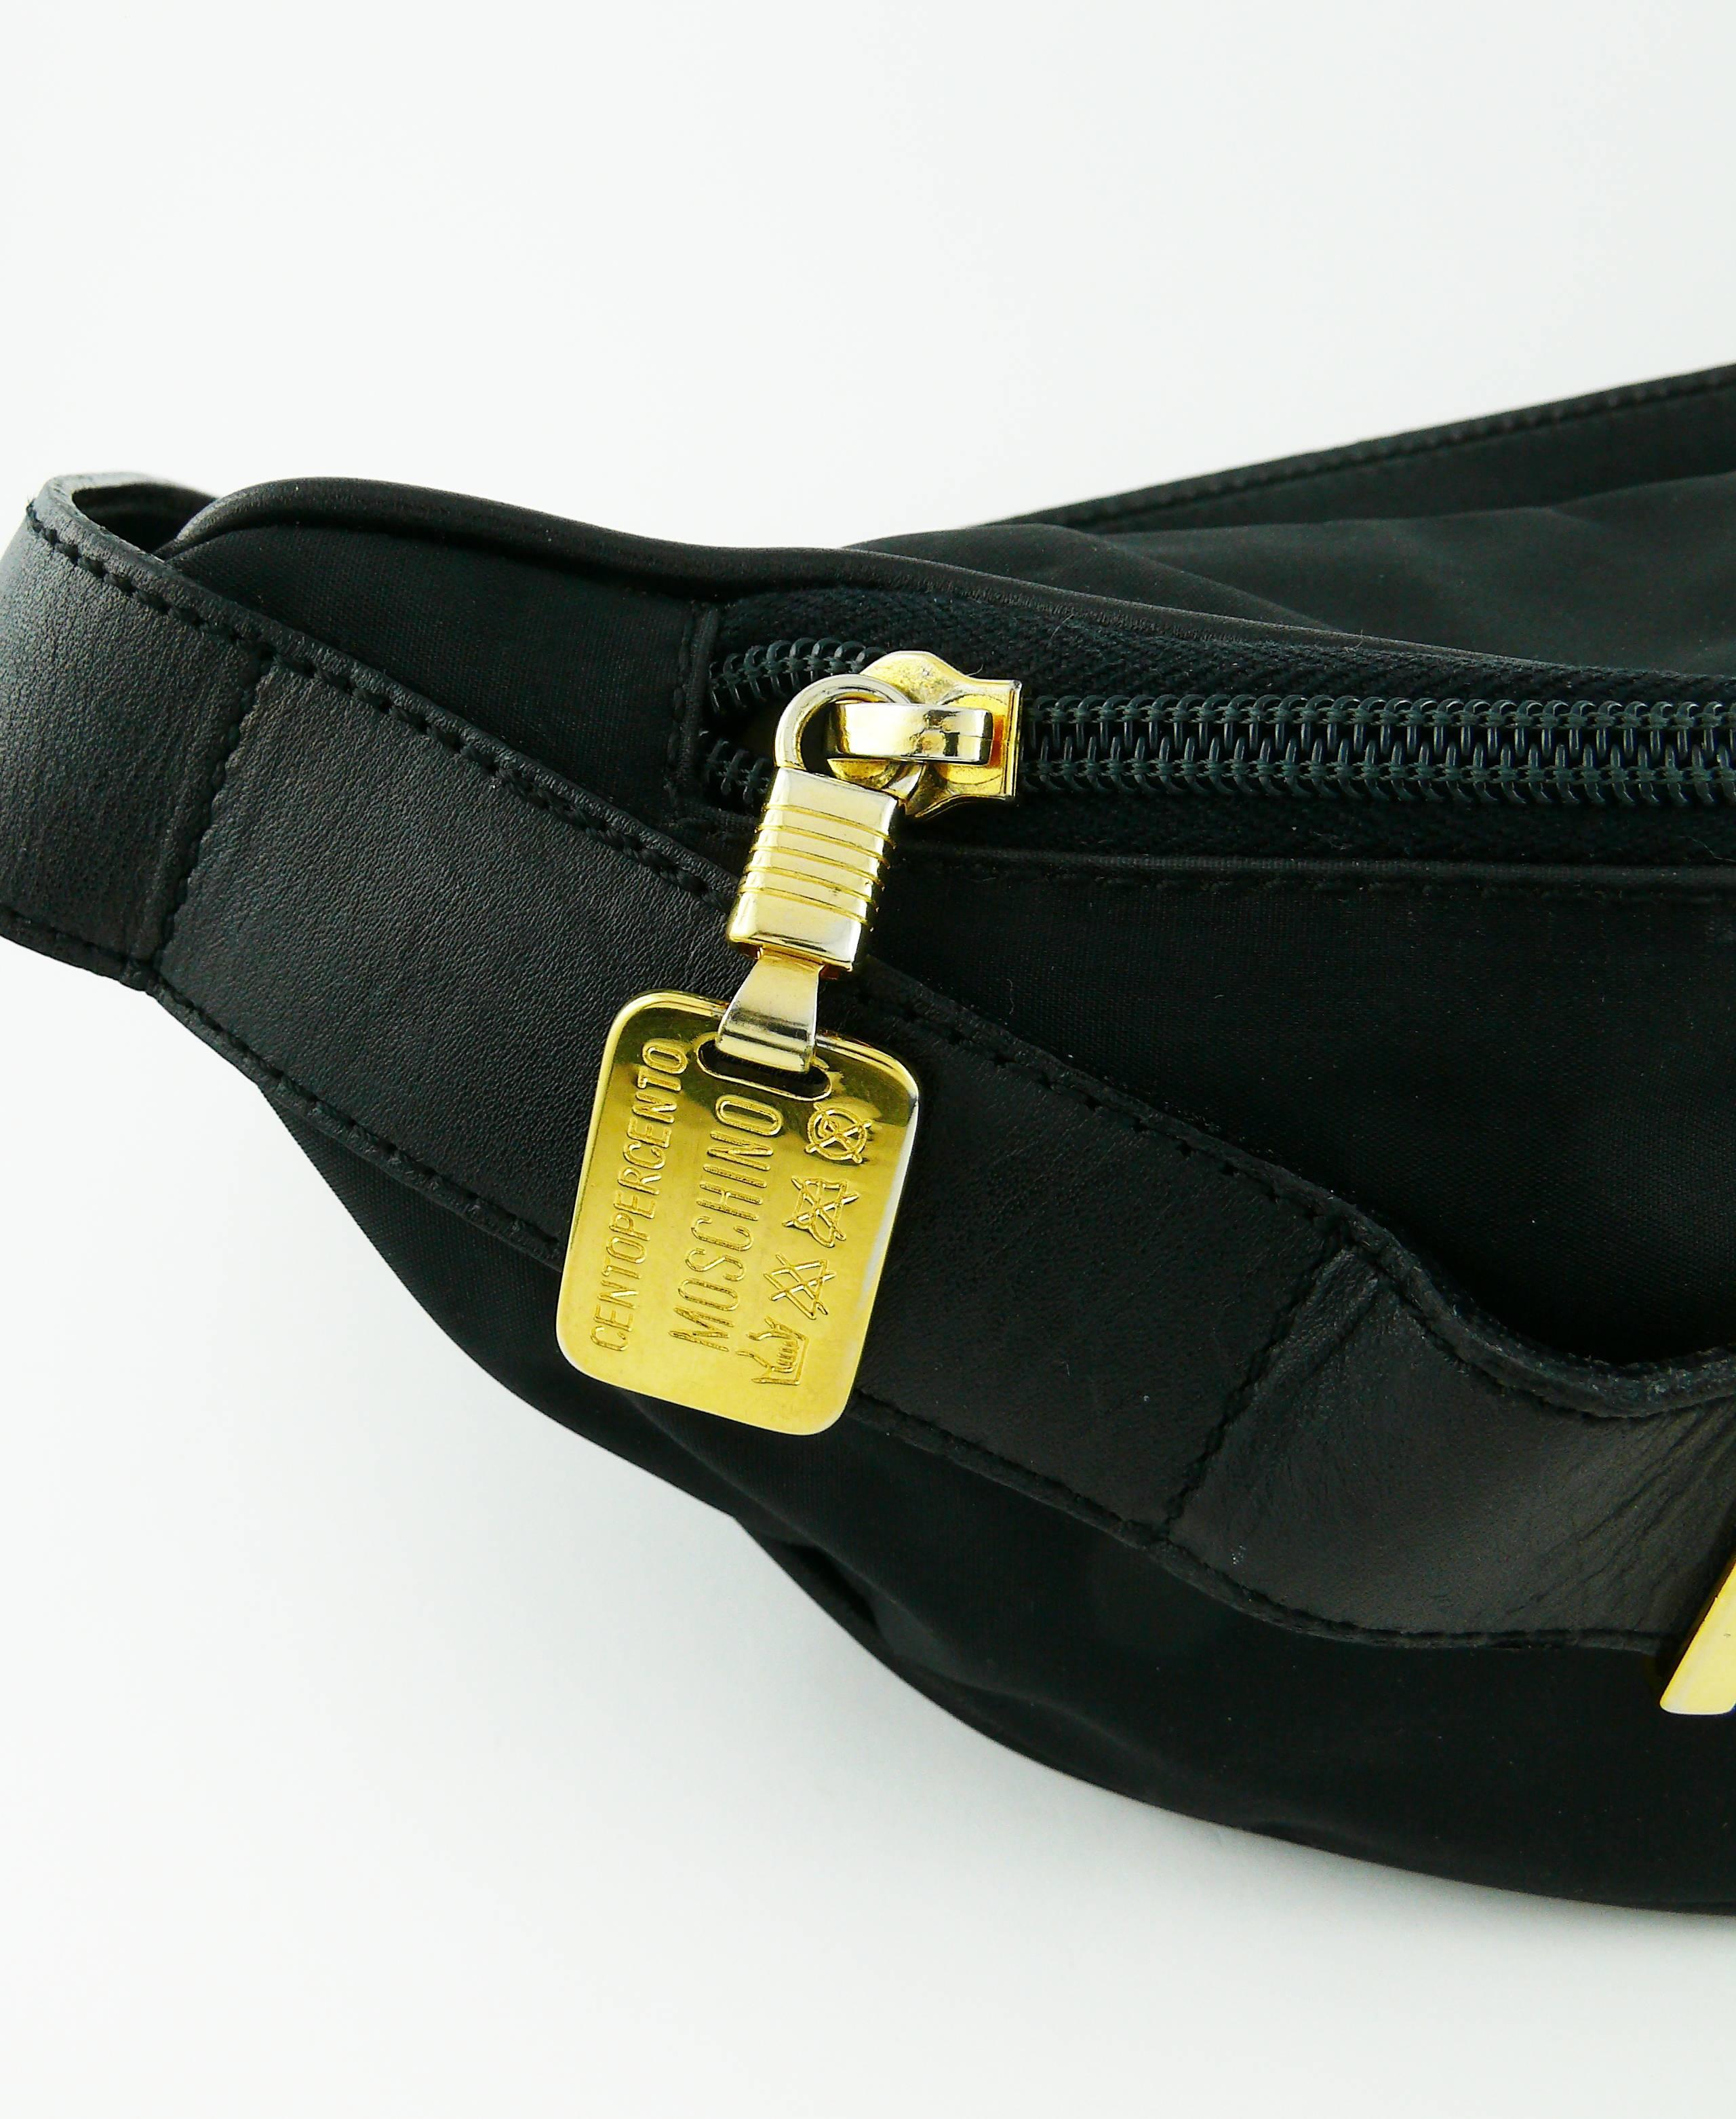 Women's or Men's Moschino by Redwall Vintage 1990s Black Fanny Pack